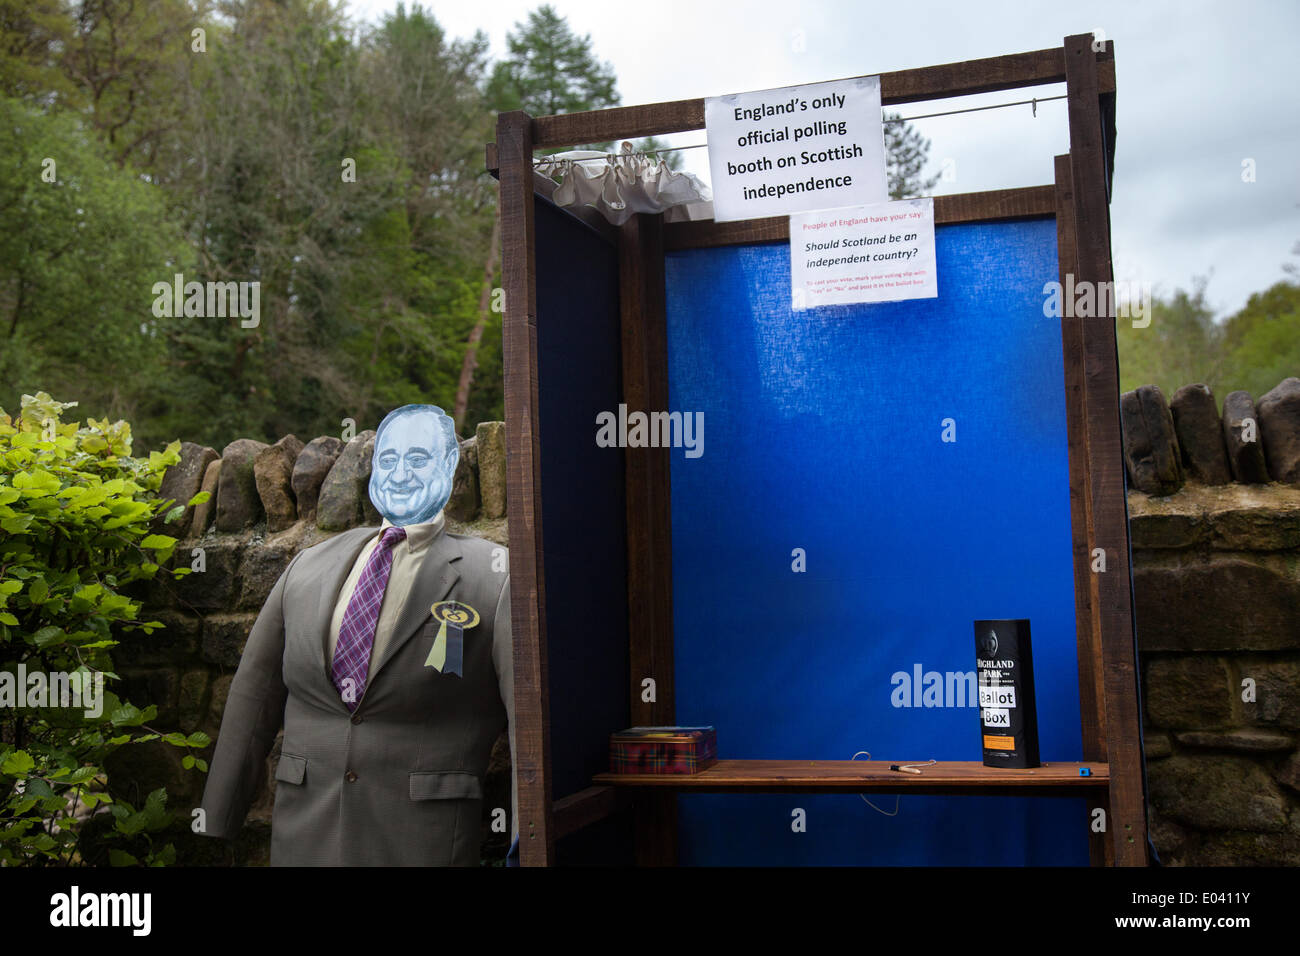 Wray, Lancaster, 1st May 2014. Alex Salmond effigy,statue, statuette, carving, sculpture, graven image, model, dummy, figure, figurine, guy; ( Hero or Villain), standing next to voting booth and ballot box,  (Englands only official polling station on Scottish Independence),  one of the Latest additions to the Wray Scarecrow Festival which opened on for a series of events including Scarecrow parade. Stock Photo